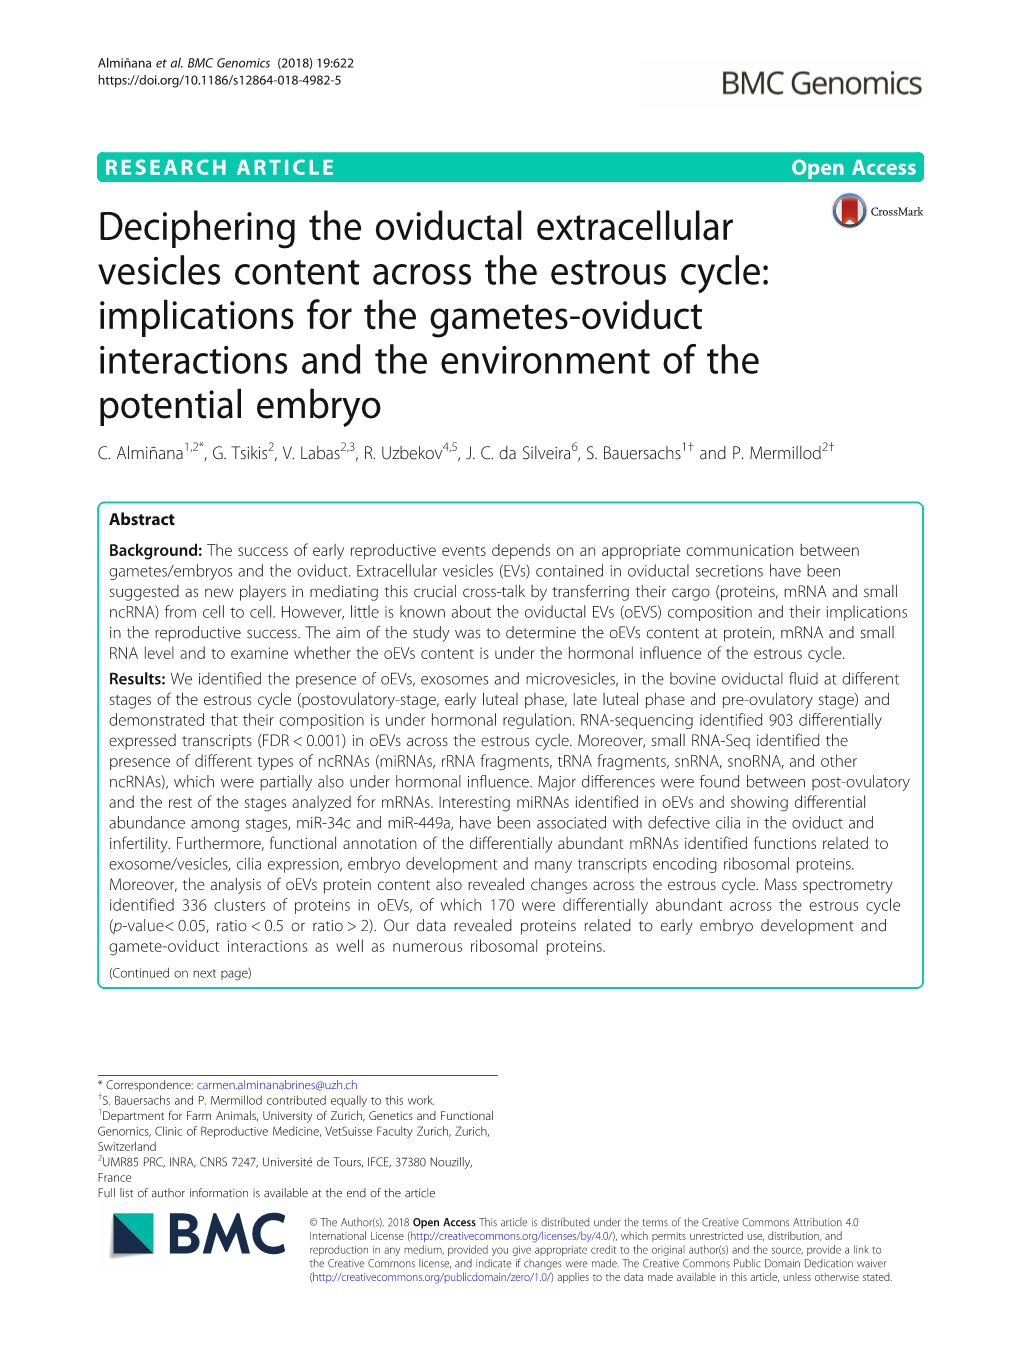 Deciphering the Oviductal Extracellular Vesicles Content